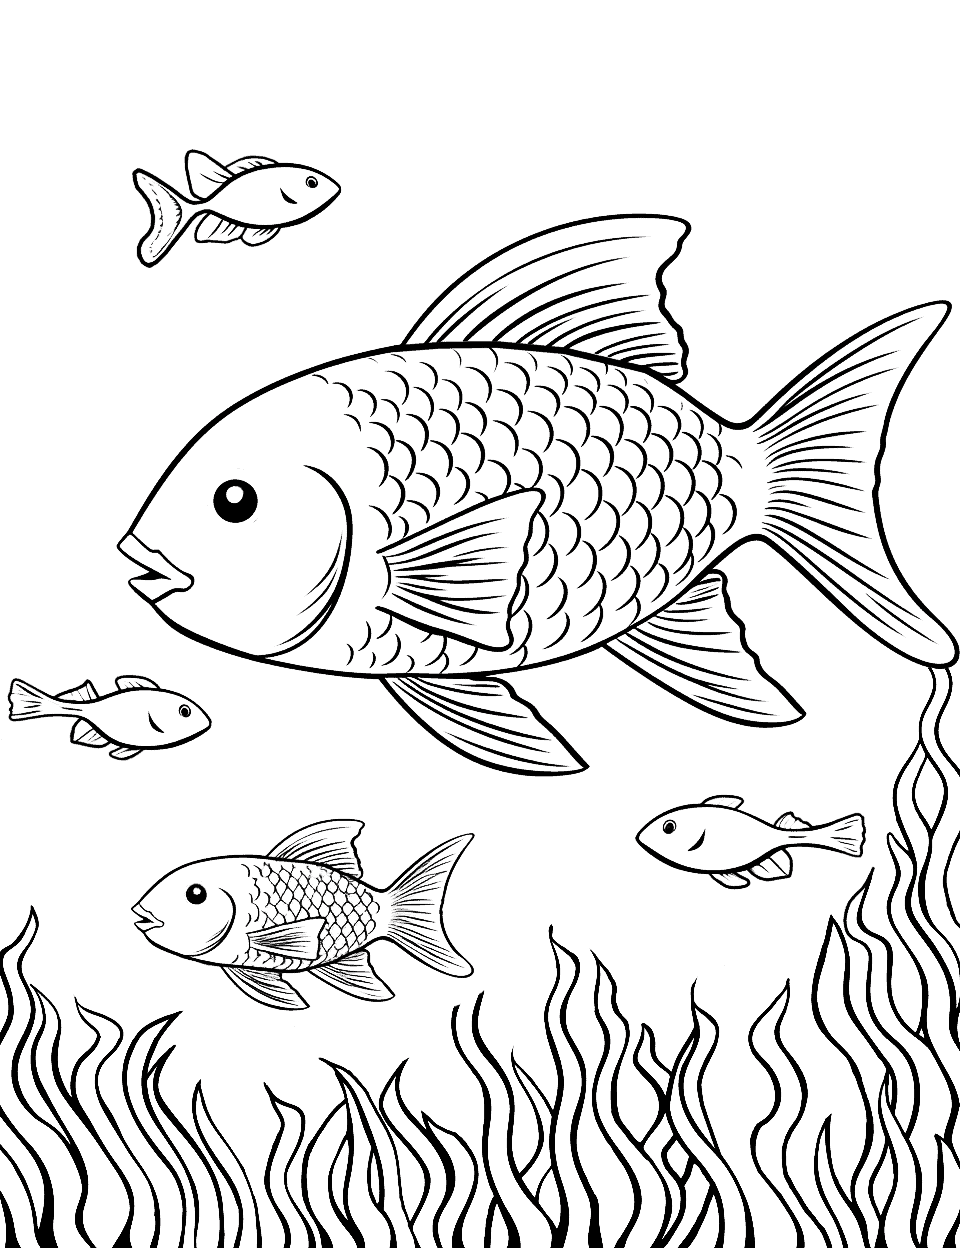 Fish Group Expedition Coloring Page - Group of fish swimming and exploring the deep waters